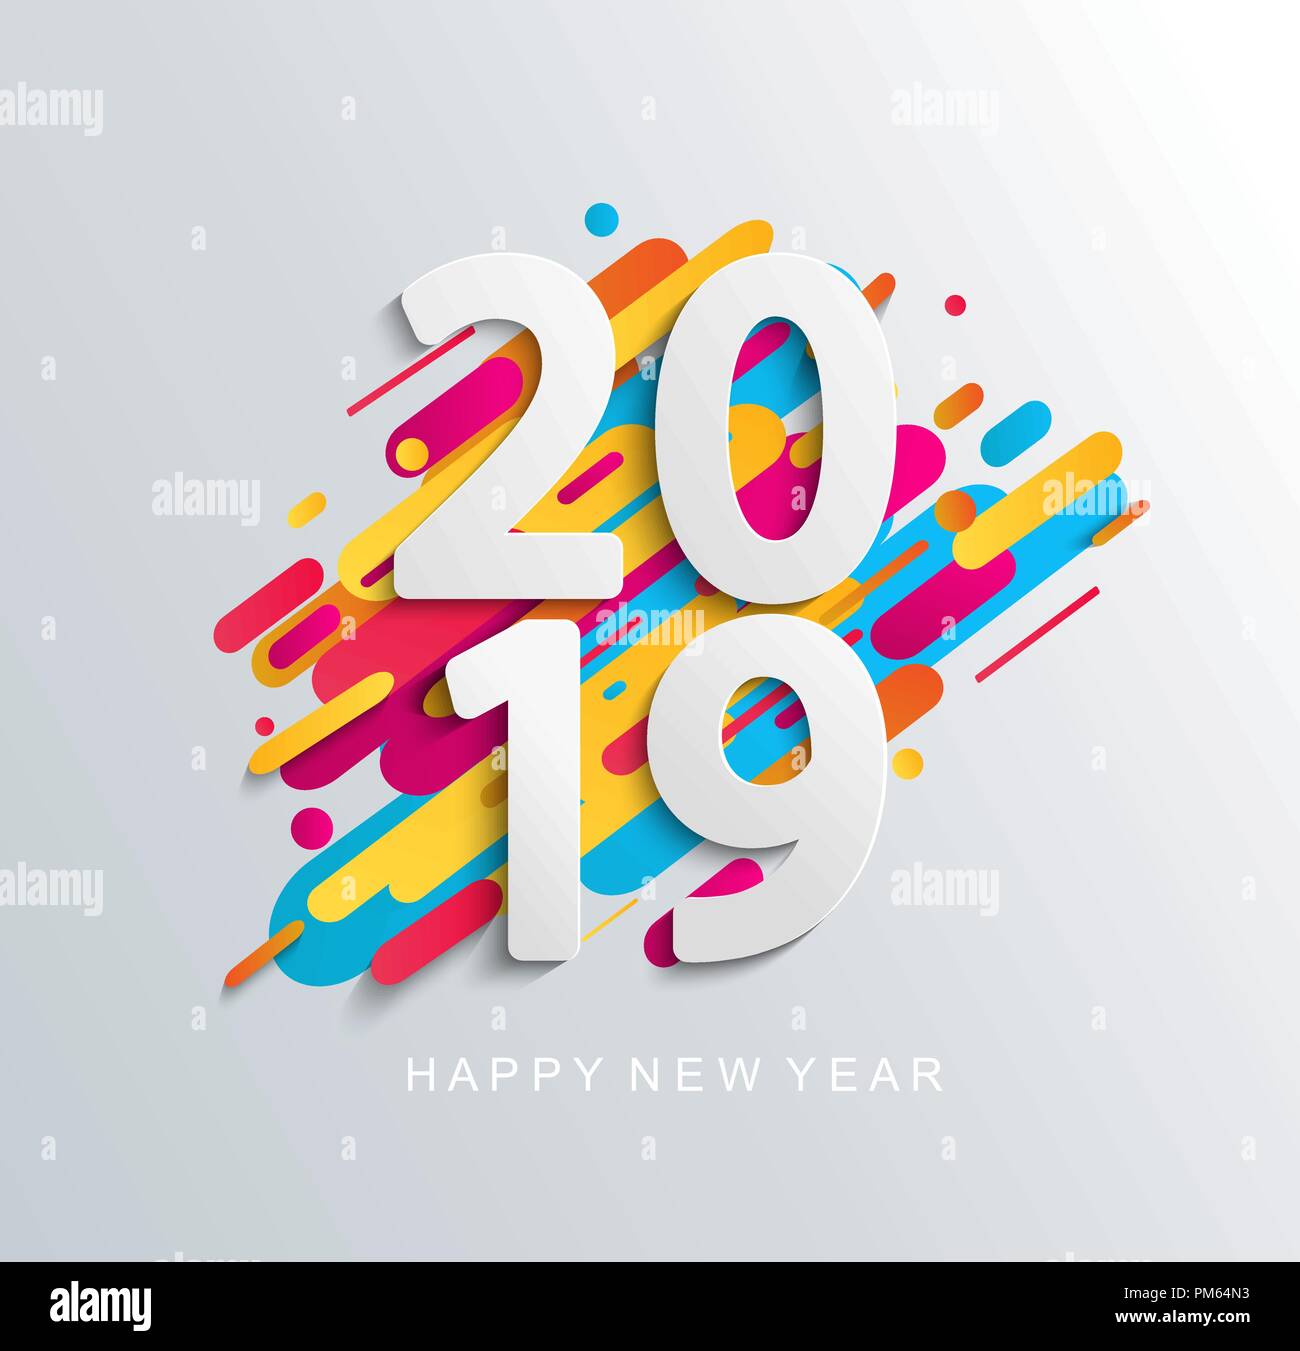 Creative happy new year 2019 banner on modern background for your seasonal flyers, greetings card and christmas themed invitations. Vector illustration. Vector illustration. Stock Vector